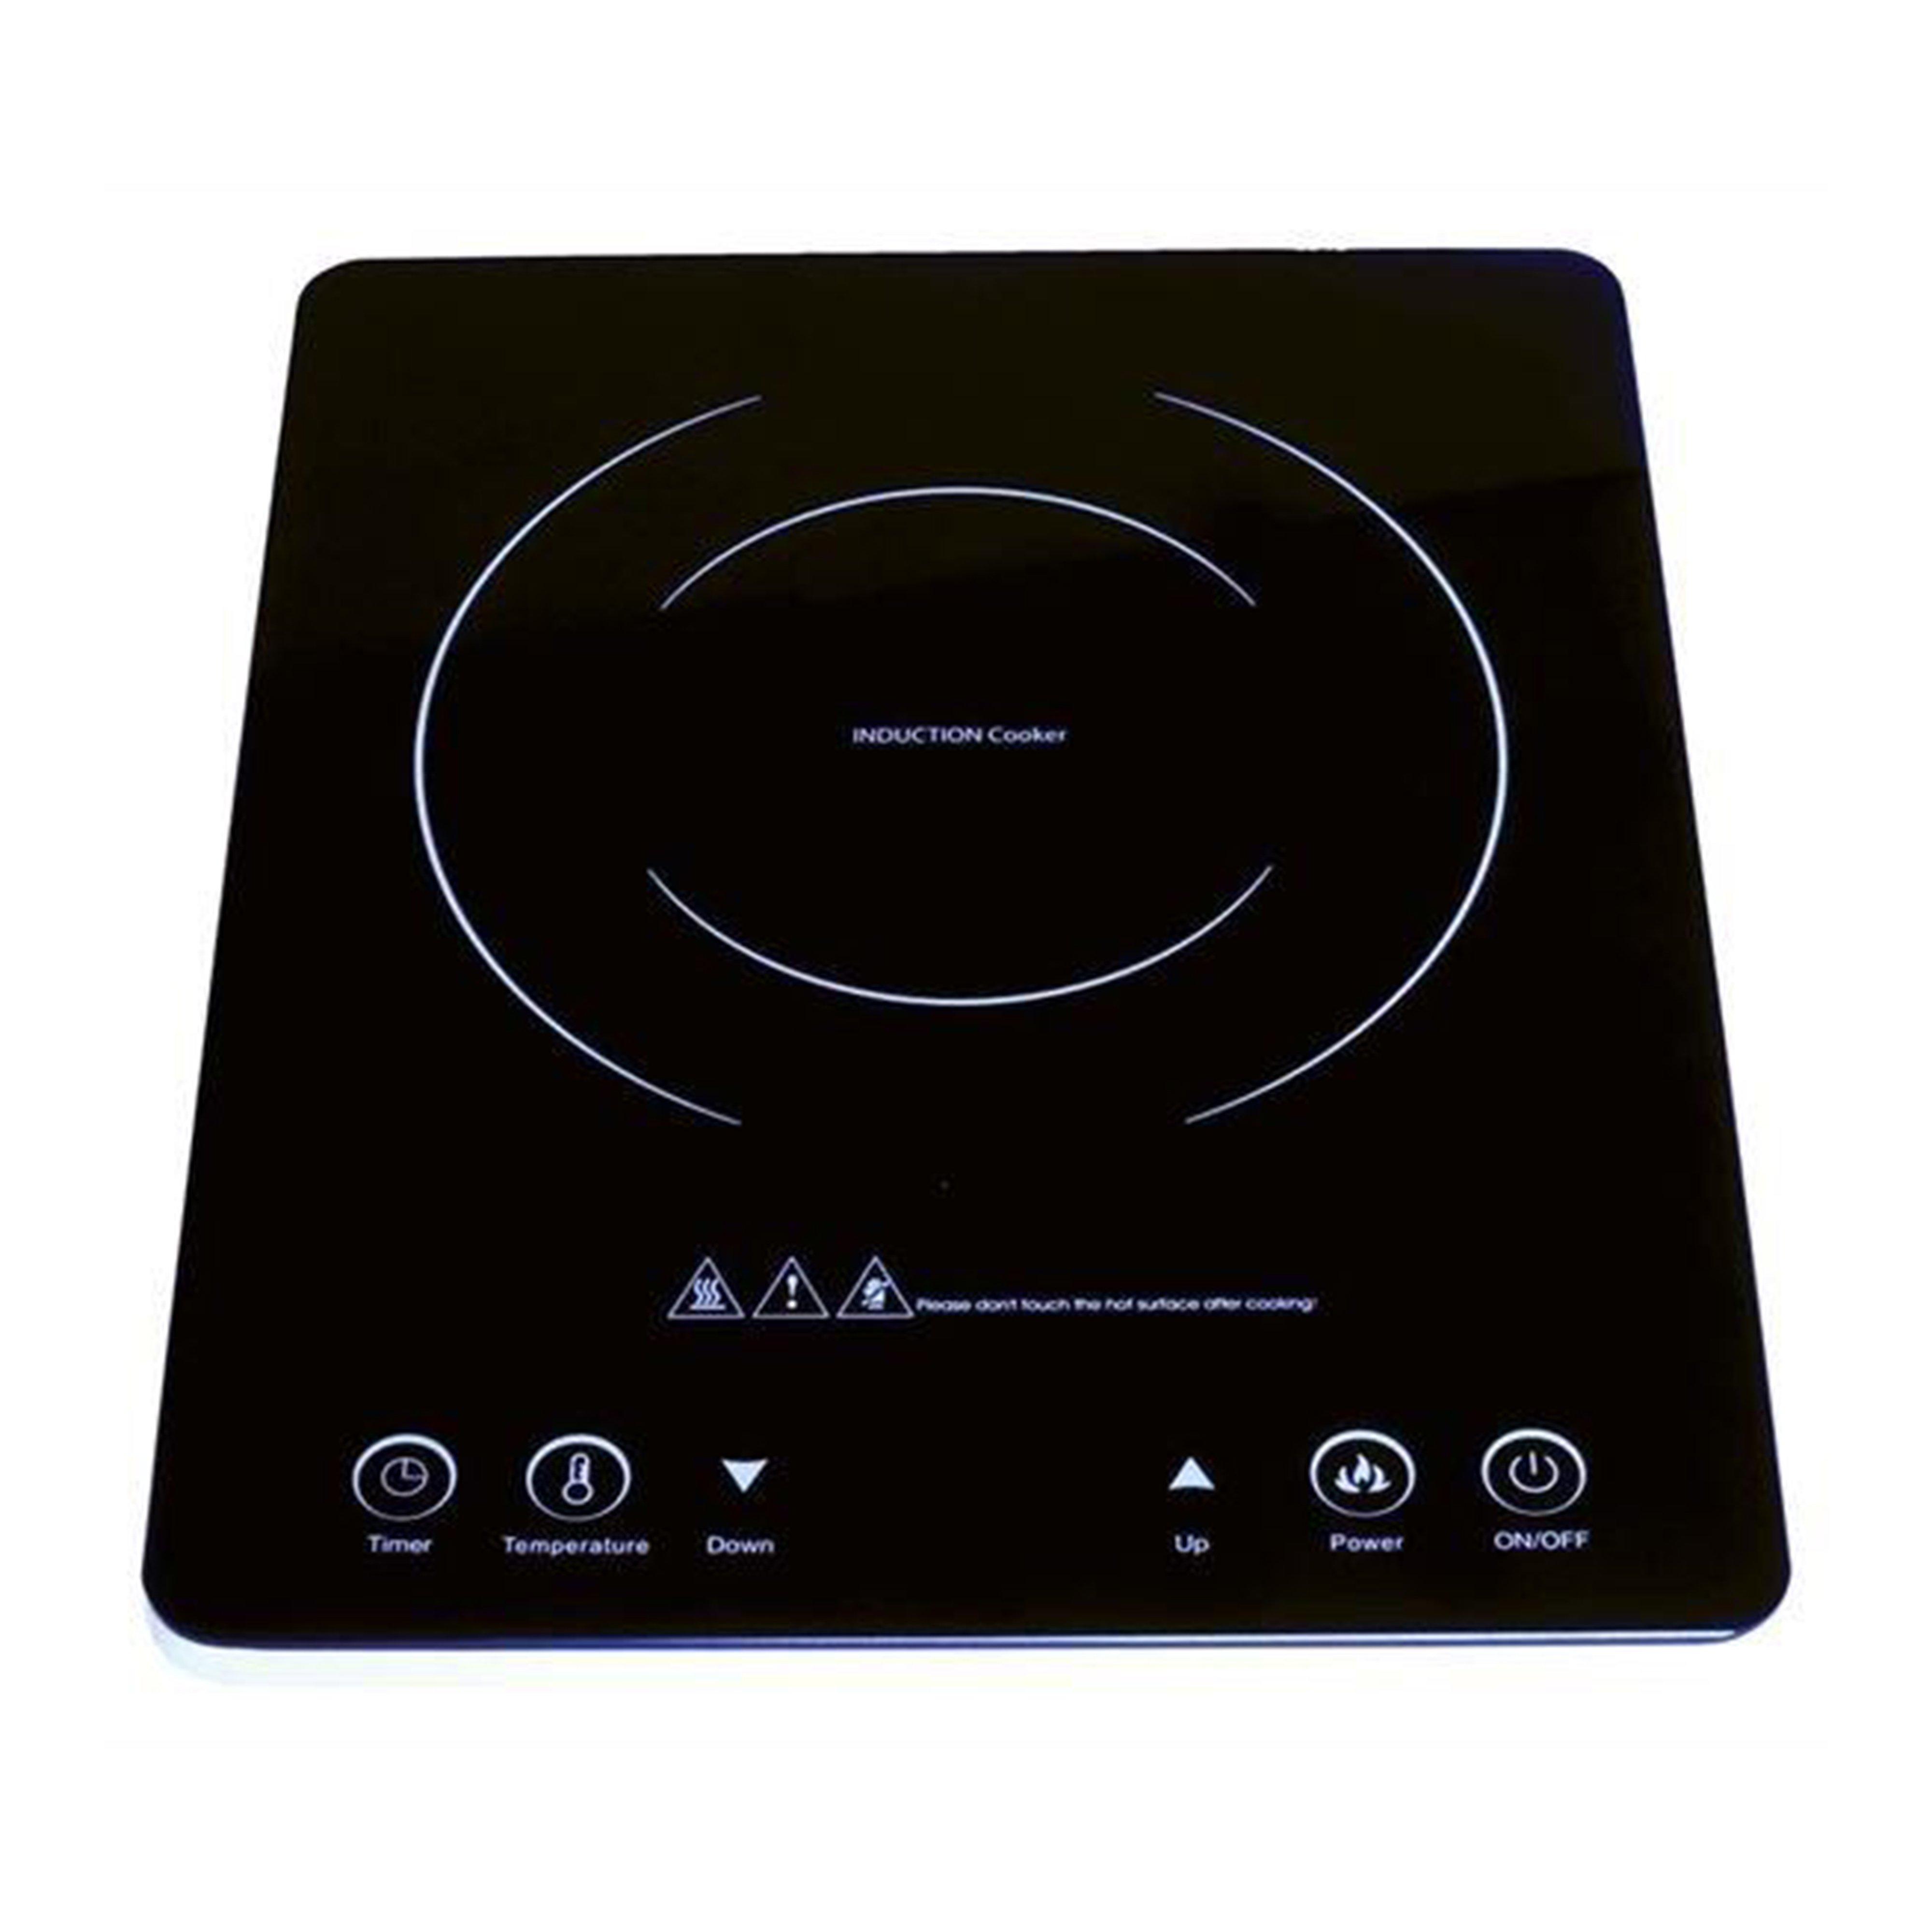 Image of Streetwize Low Wattage Induction Cooker - Black/Blk, Black/BLK